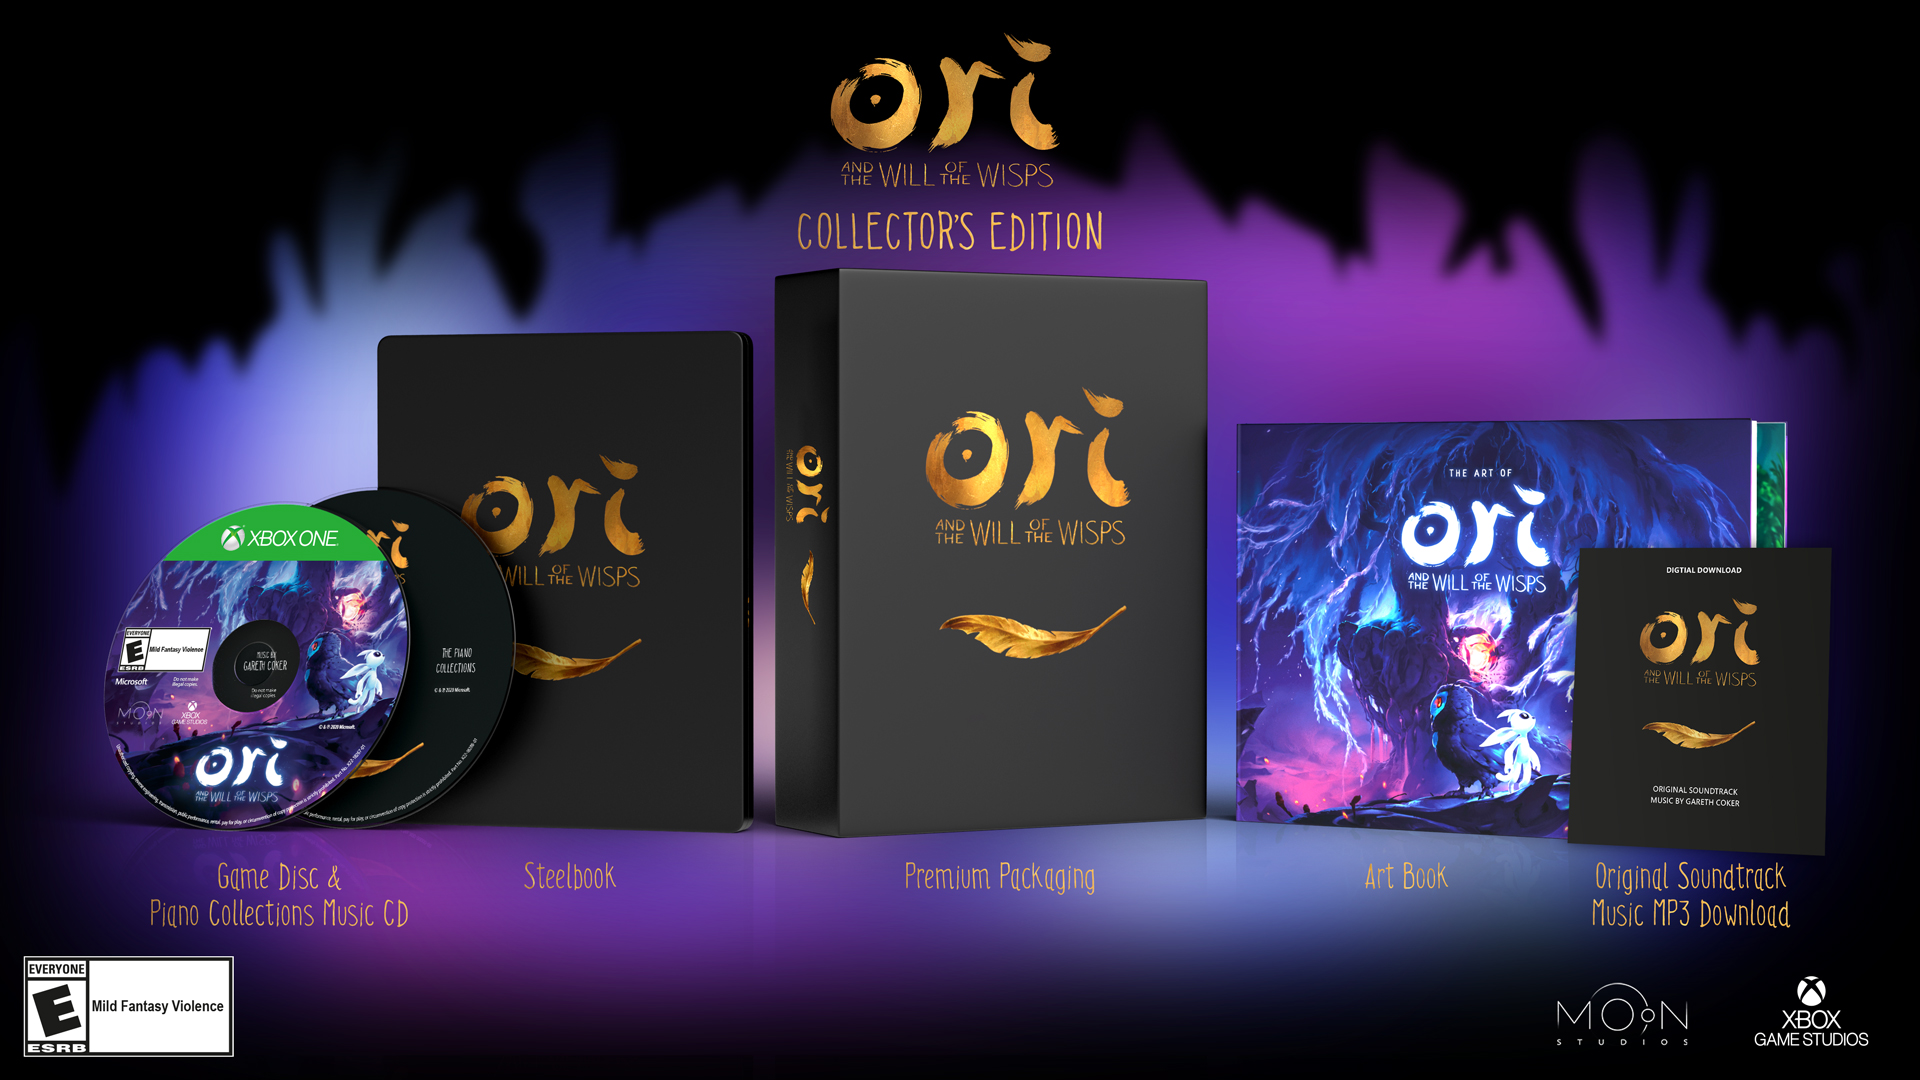 Video For Ori and The Will of the Wisps Available for Pre-order Today Ahead of March 11, 2020 Release